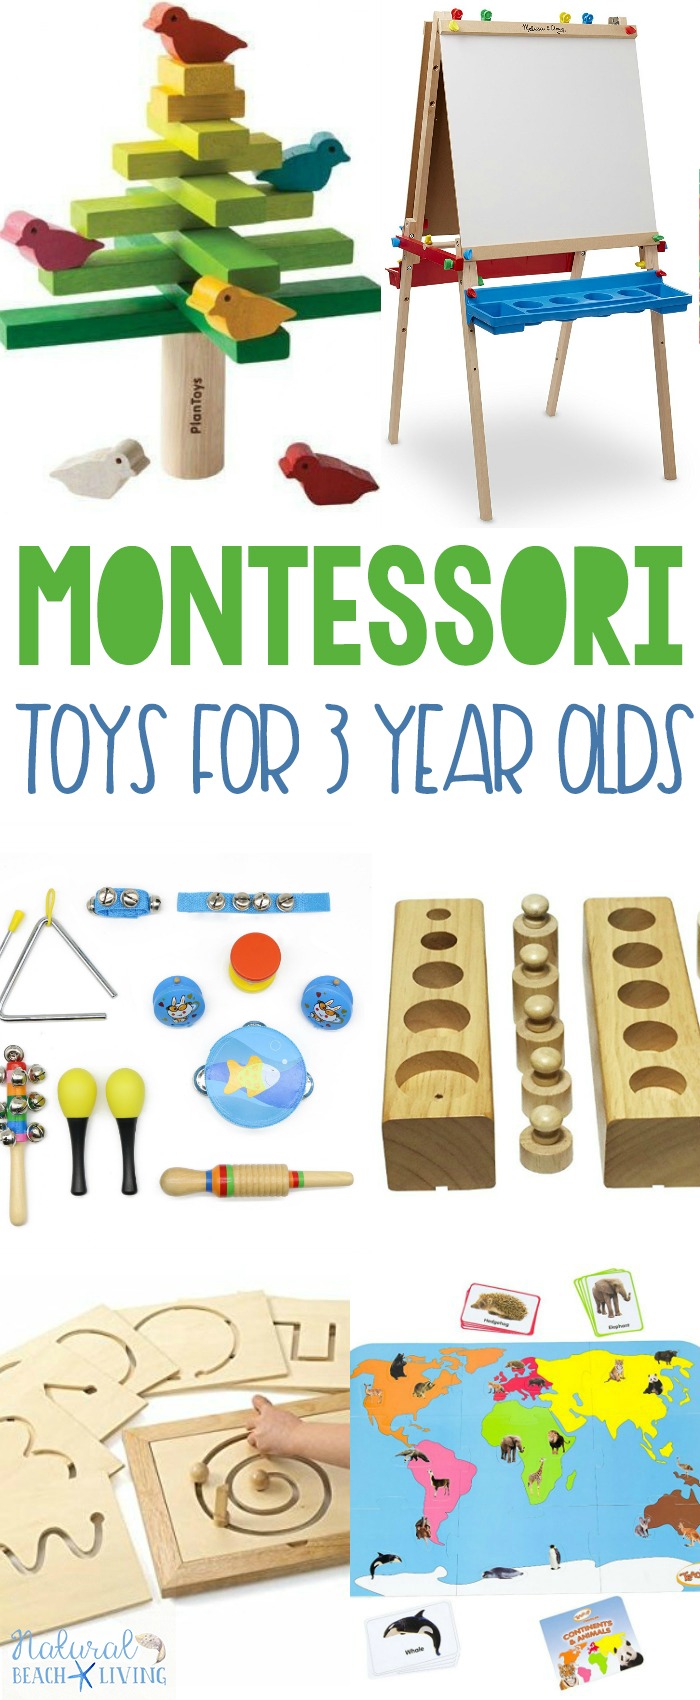 Montessori Gifts 3 Year Olds Love